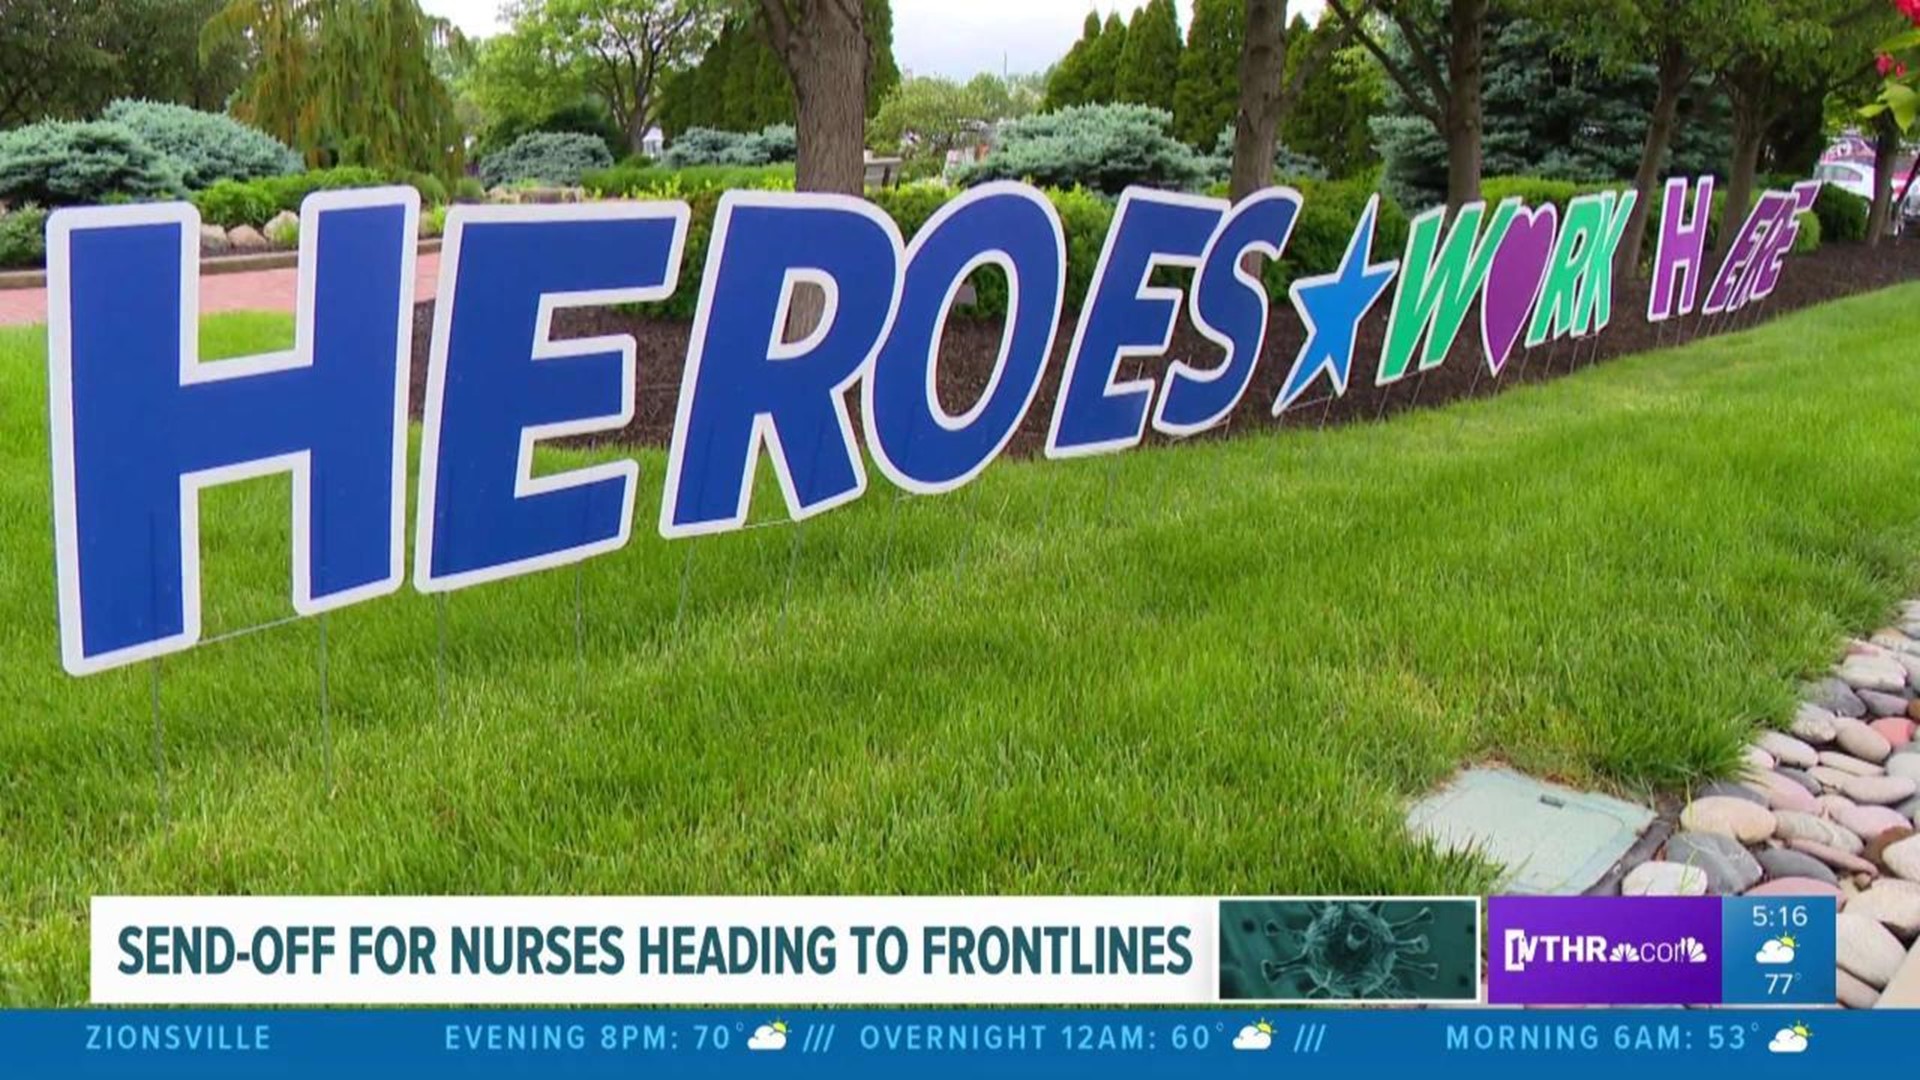 Send-off for nurses headed to front lines